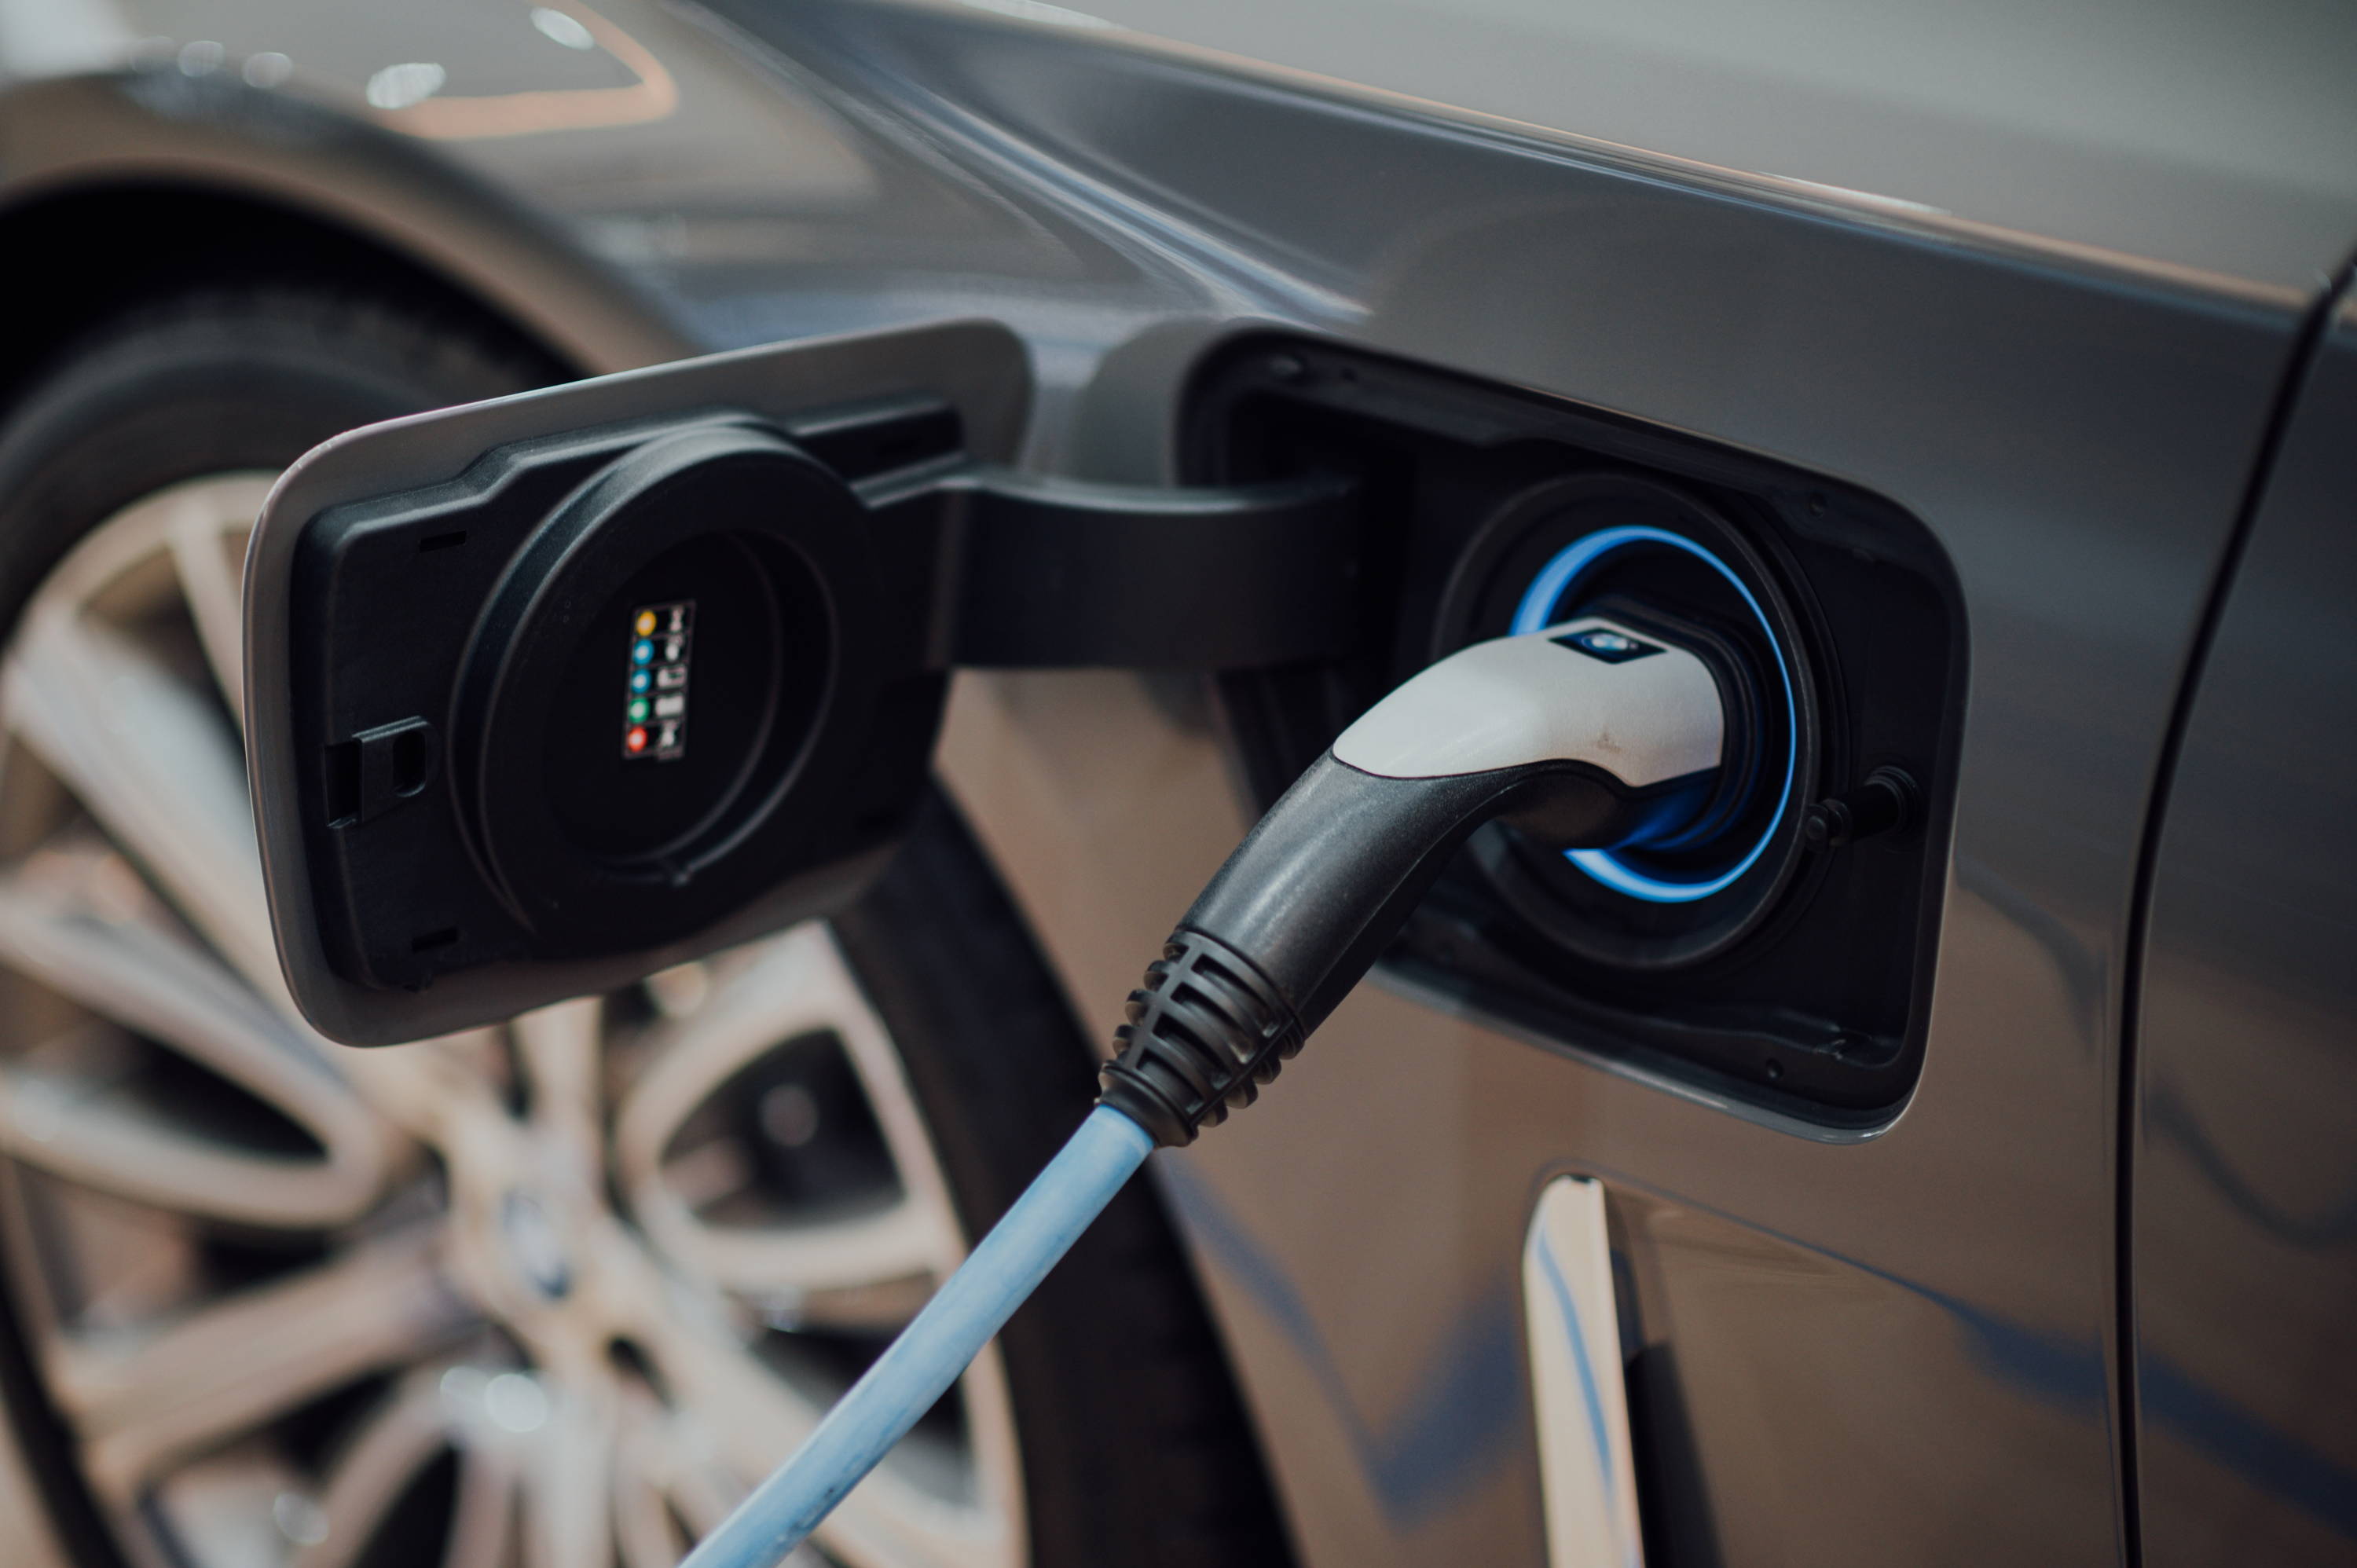 Should you switch to an electric car? Let’s find out together by weighing out the pros and cons. 